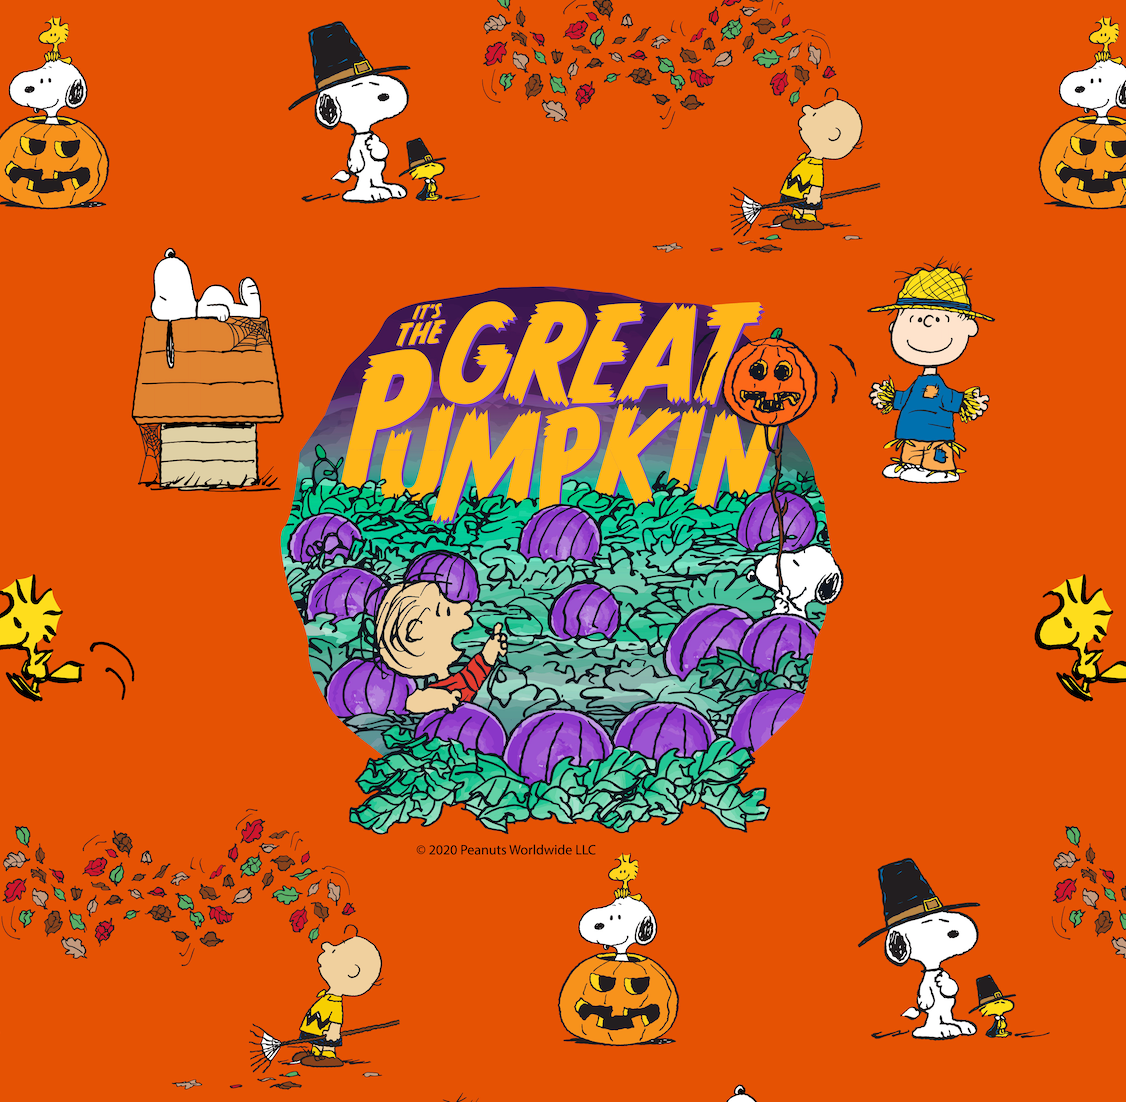 It's the Great Pumpkin graphic